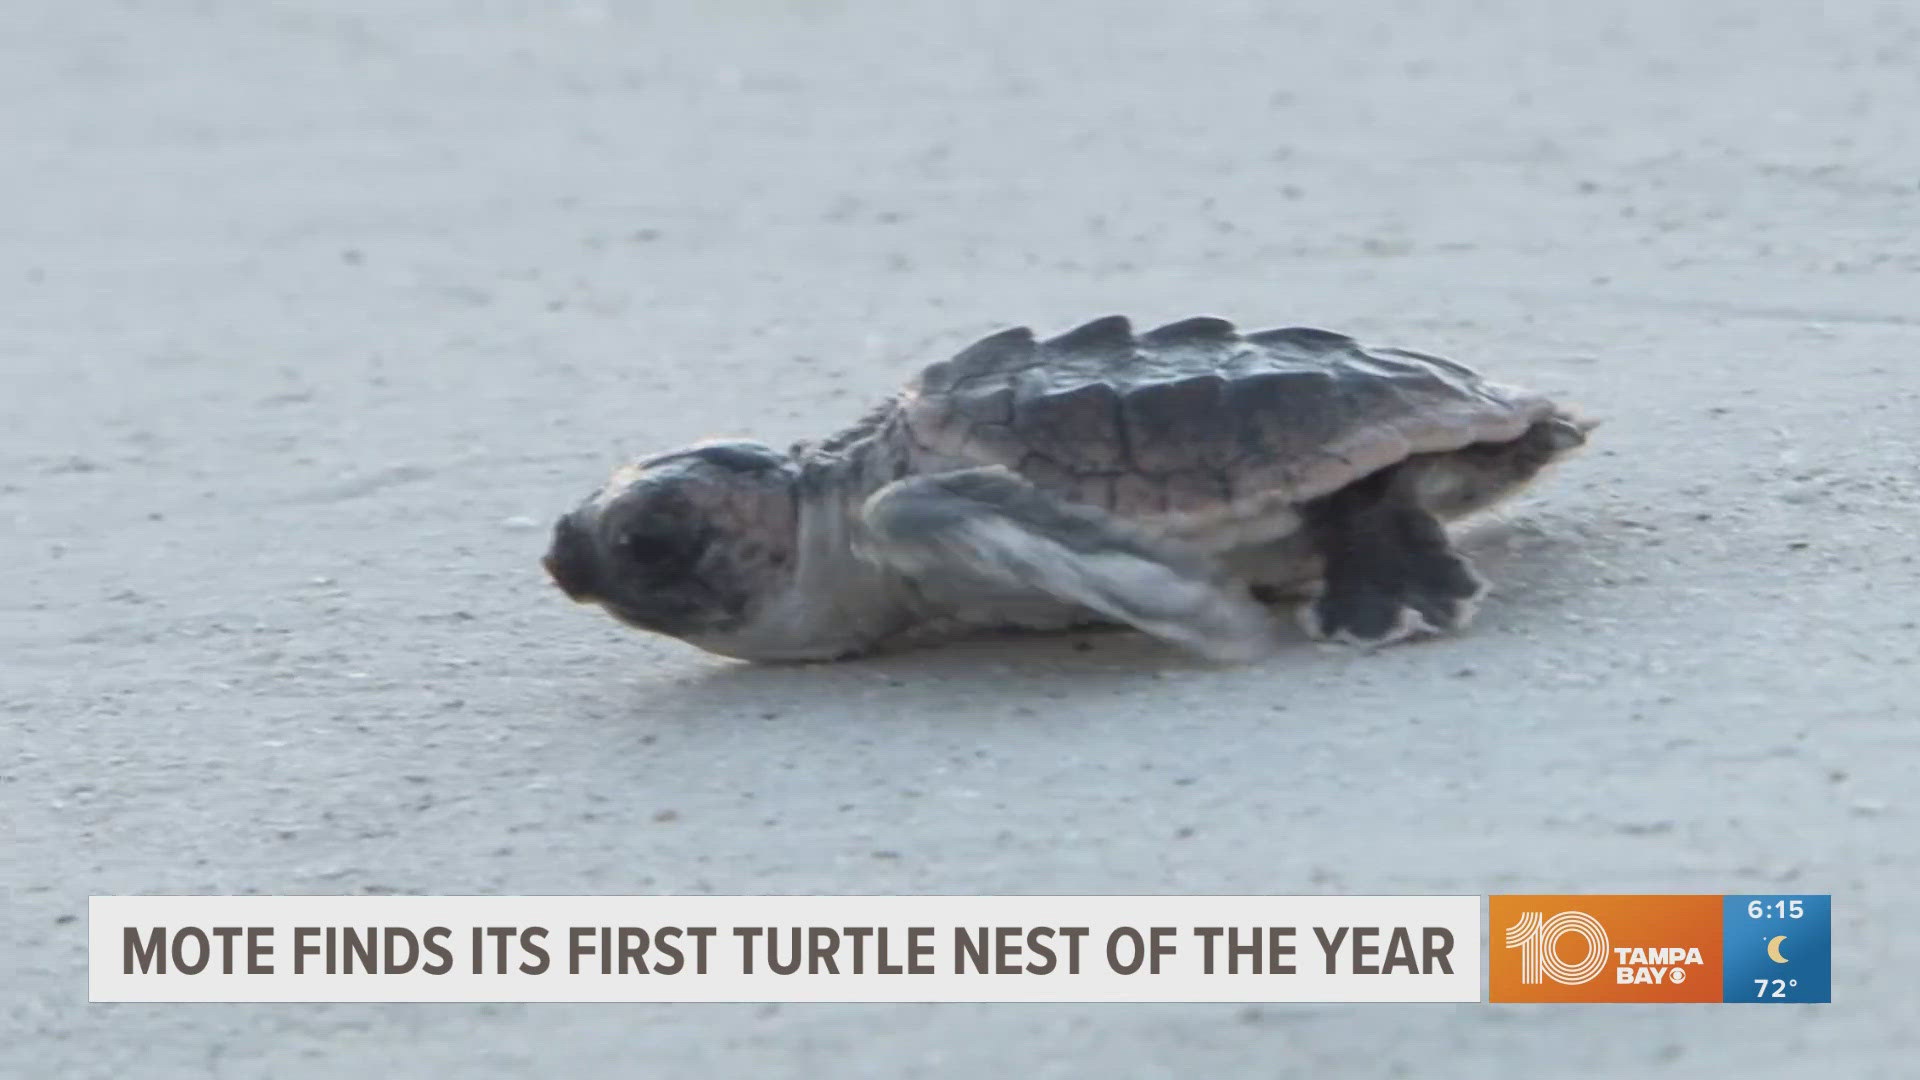 The official start of turtle nesting season is May 1.